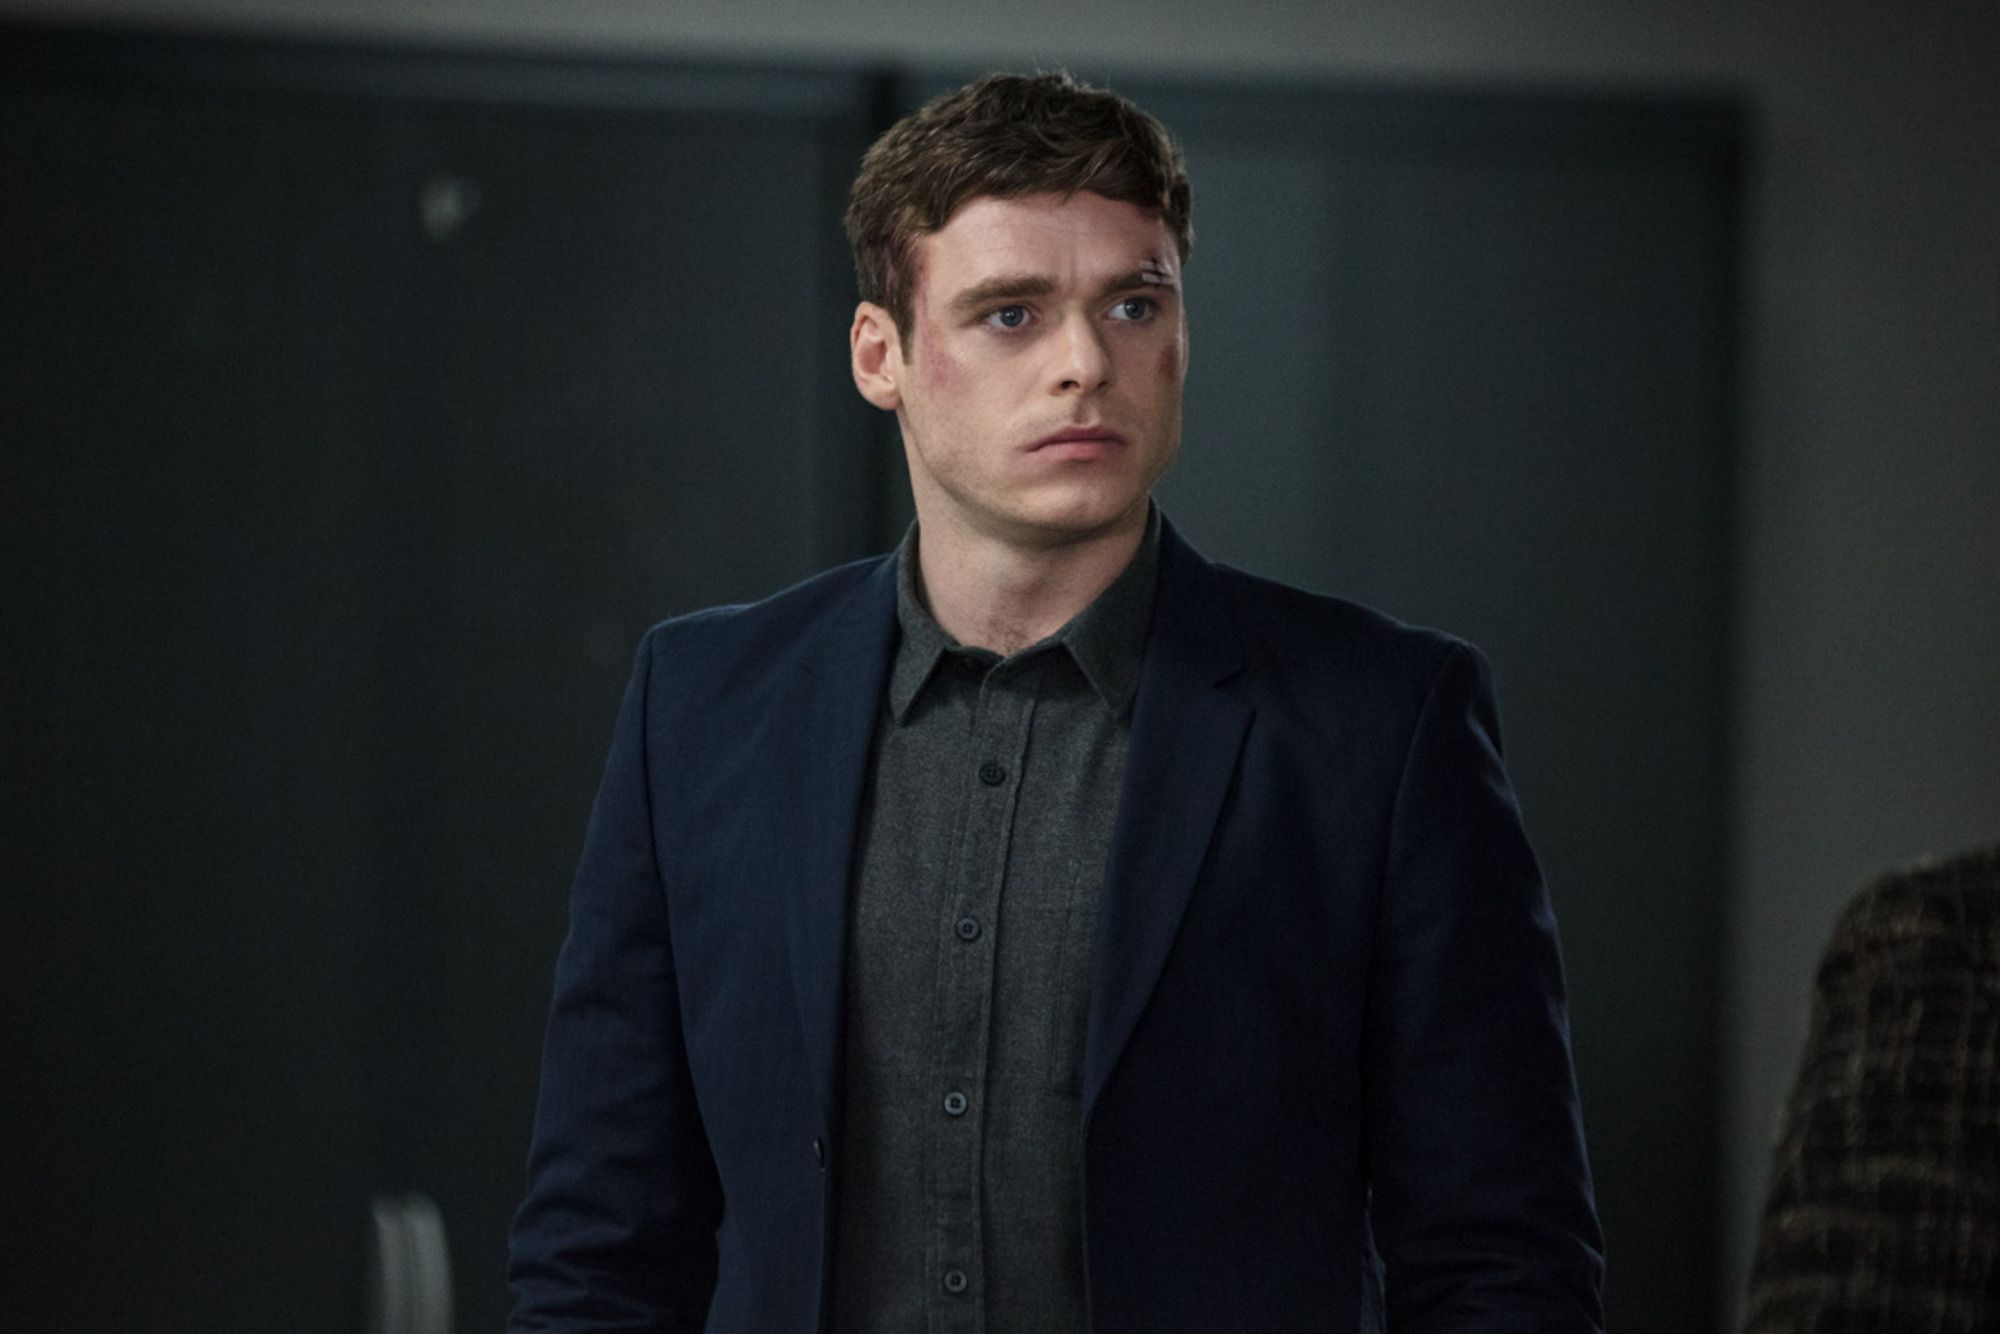 Bodyguard episode 5: Theories and questions as series continues on BBC One